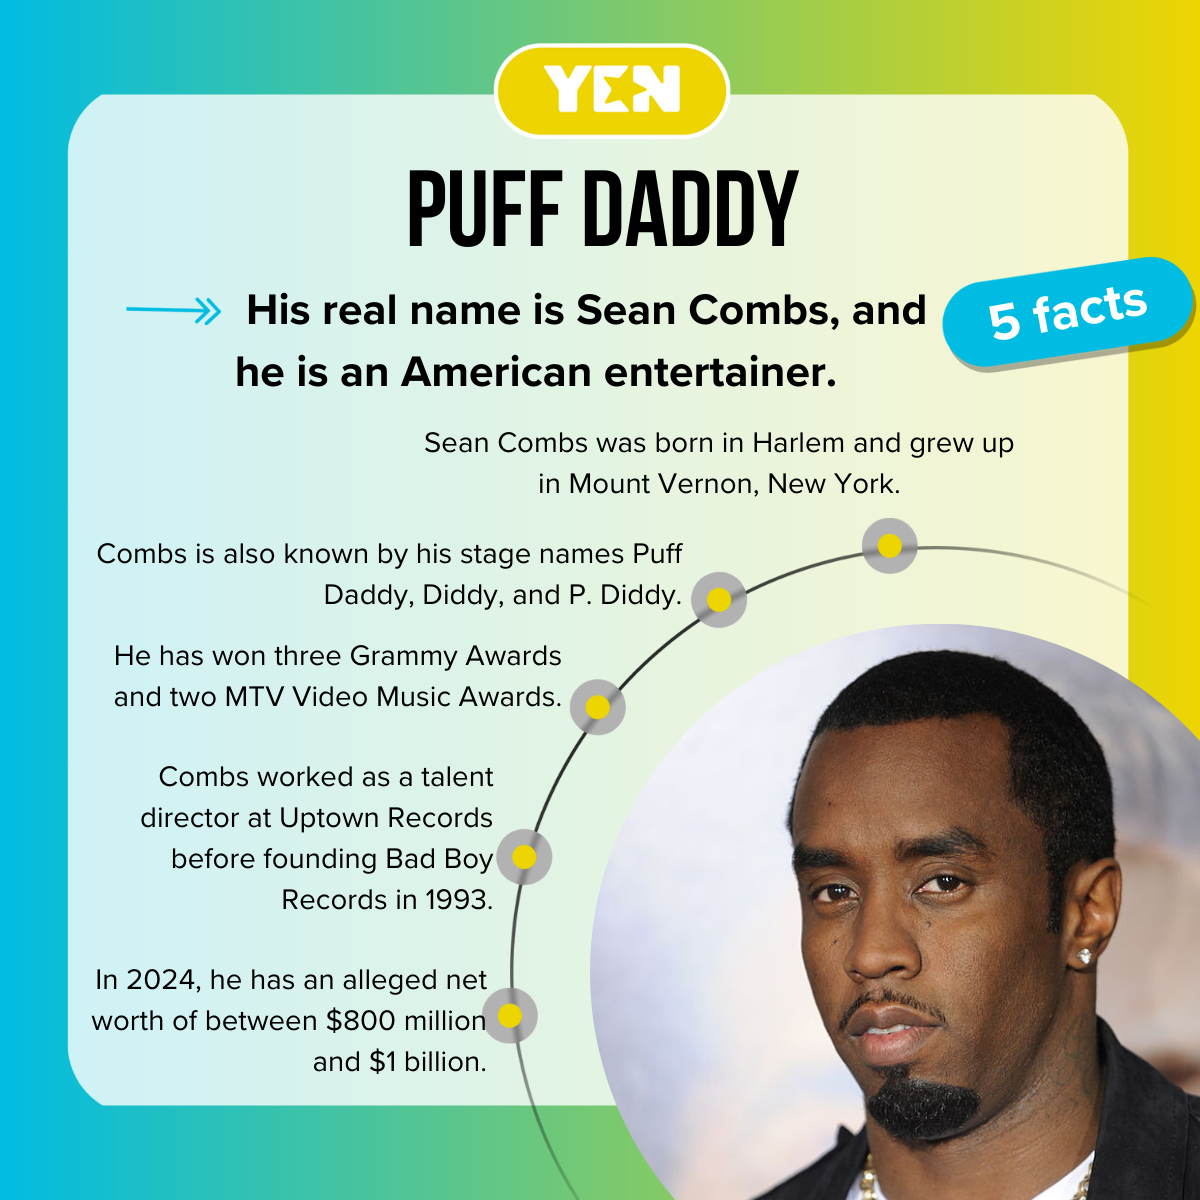 5 facts about Puff Daddy